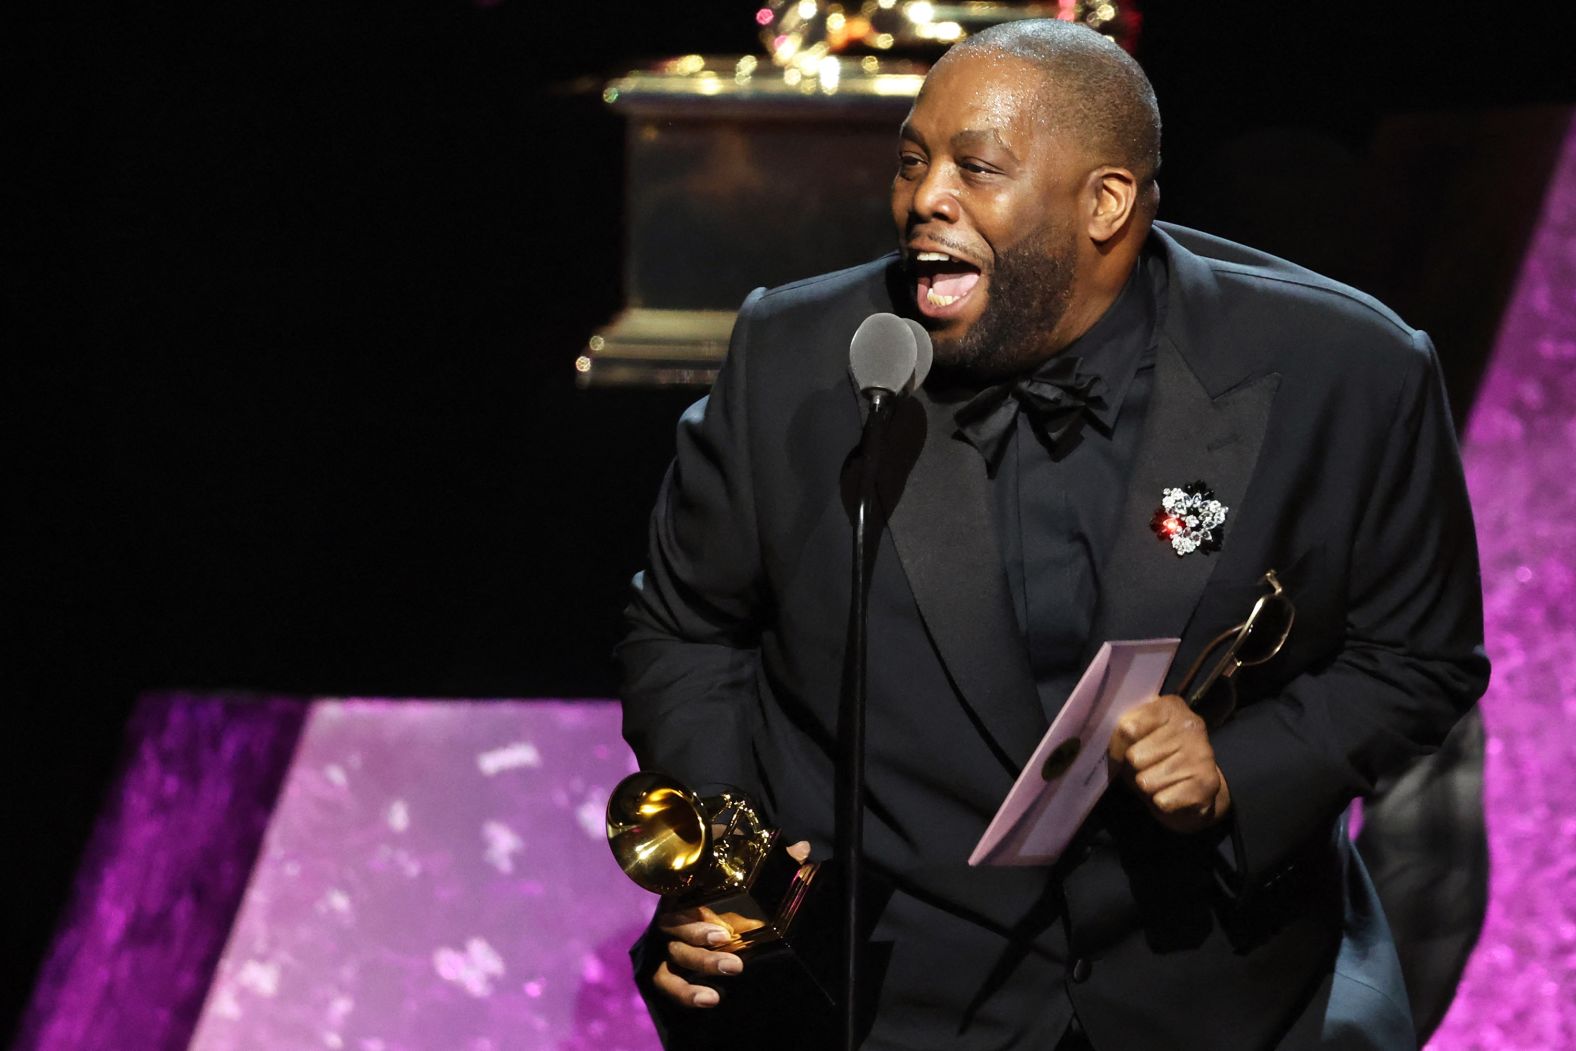 Killer Mike accepts the award for best rap album ("Michael") before the live show. He won three Grammys, <a href="index.php?page=&url=https%3A%2F%2Fwww.cnn.com%2F2024%2F02%2F04%2Fentertainment%2Fkiller-mike-arrested-grammys%2Findex.html">but he was also booked Sunday on a misdemeanor battery charge</a>, according to the Los Angeles Police Department. The department said he was detained and handcuffed for a physical altercation that took place on a block adjacent to the Crypto.com Arena where the Grammys were held. “There was some confusion around which door my team and I should enter,” the rapper said in a statement the next day. “We experienced an over-zealous security guard.” He expressed confidence that he would be cleared of wrongdoing.